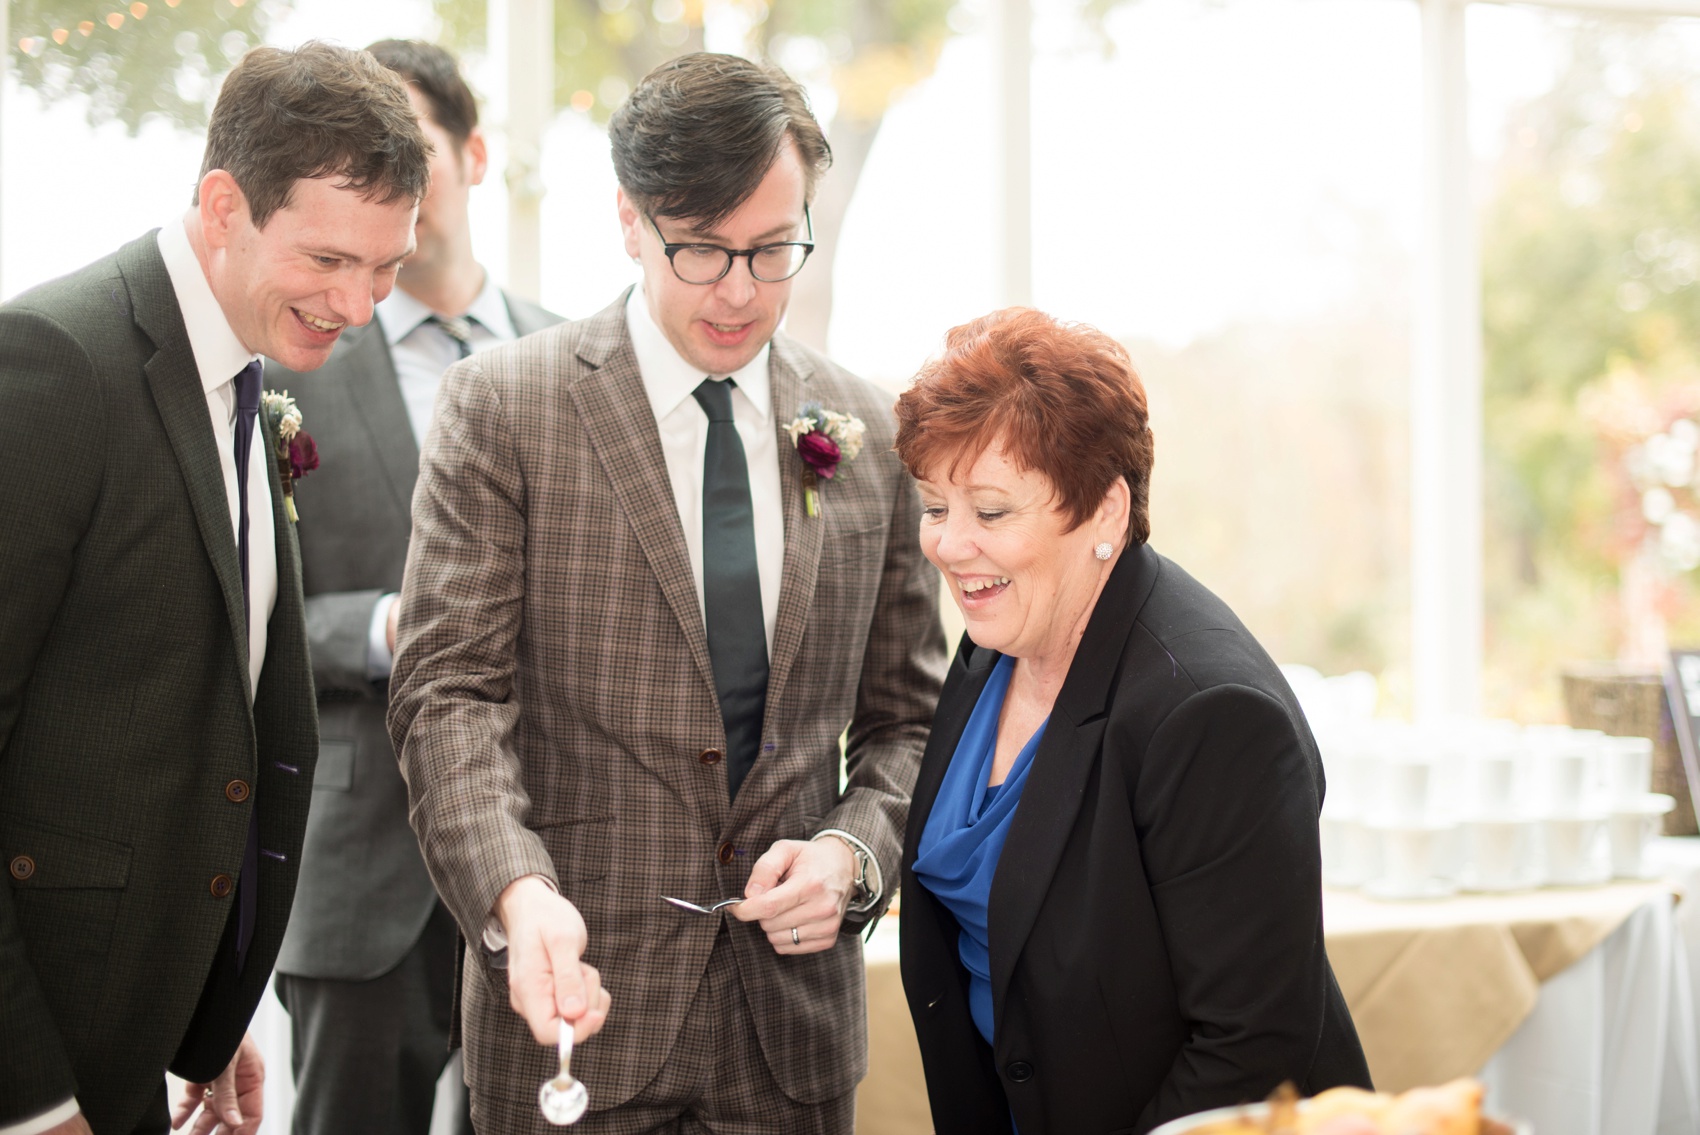 Crabtree Kittle's House wedding in NY. Images by Mikkel Paige Photography for a gay fall wedding. Coordination by Jove Meyer Events. Family recipe banana pudding dessert surprise! 